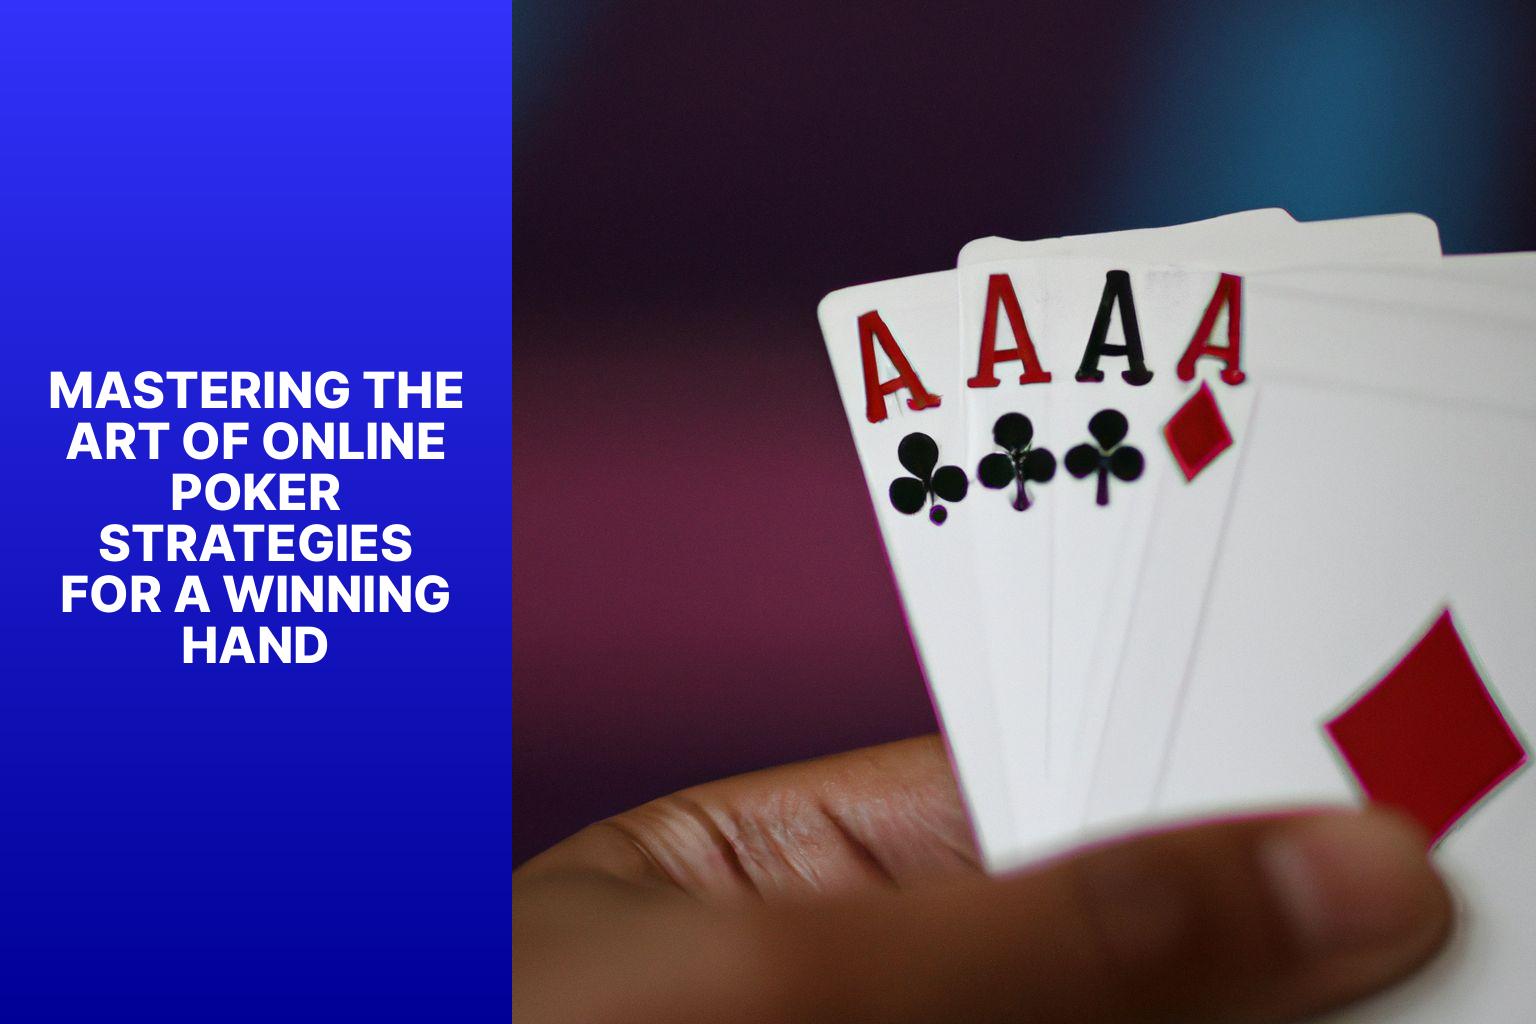 Mastering the Art of Online Poker Strategies for a Winning Hand